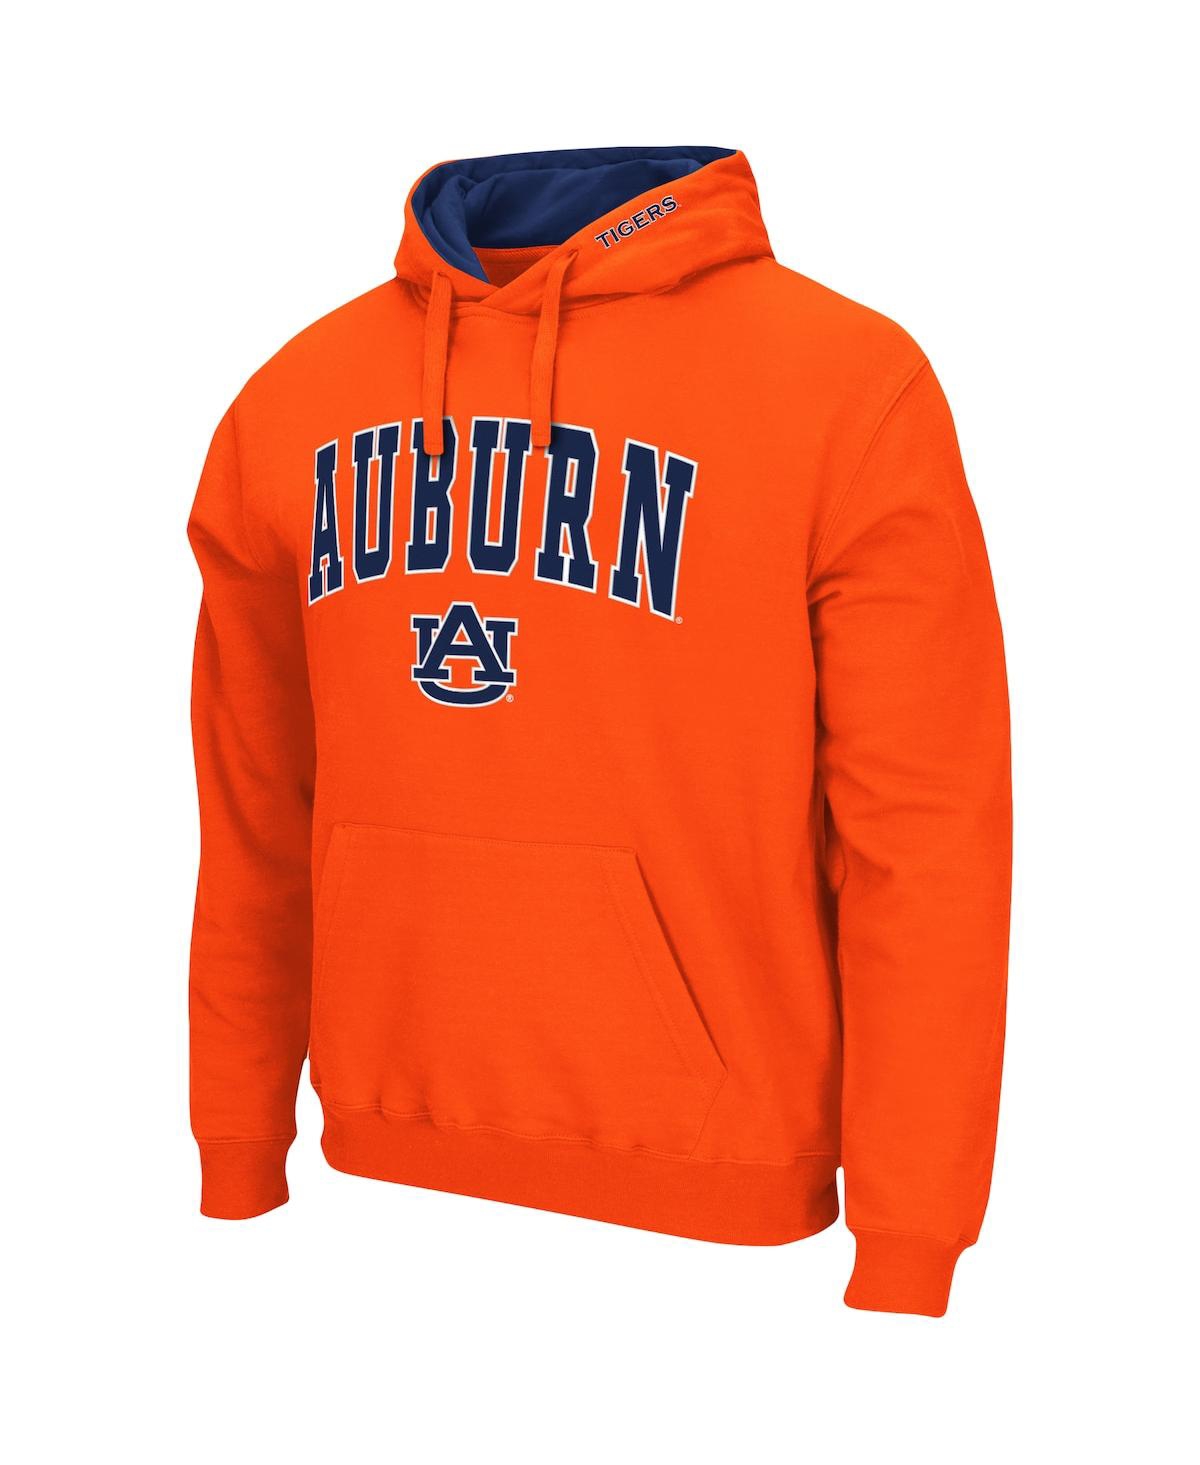 Men's Colosseum Navy Columbia University Arch and Logo Pullover Hoodie